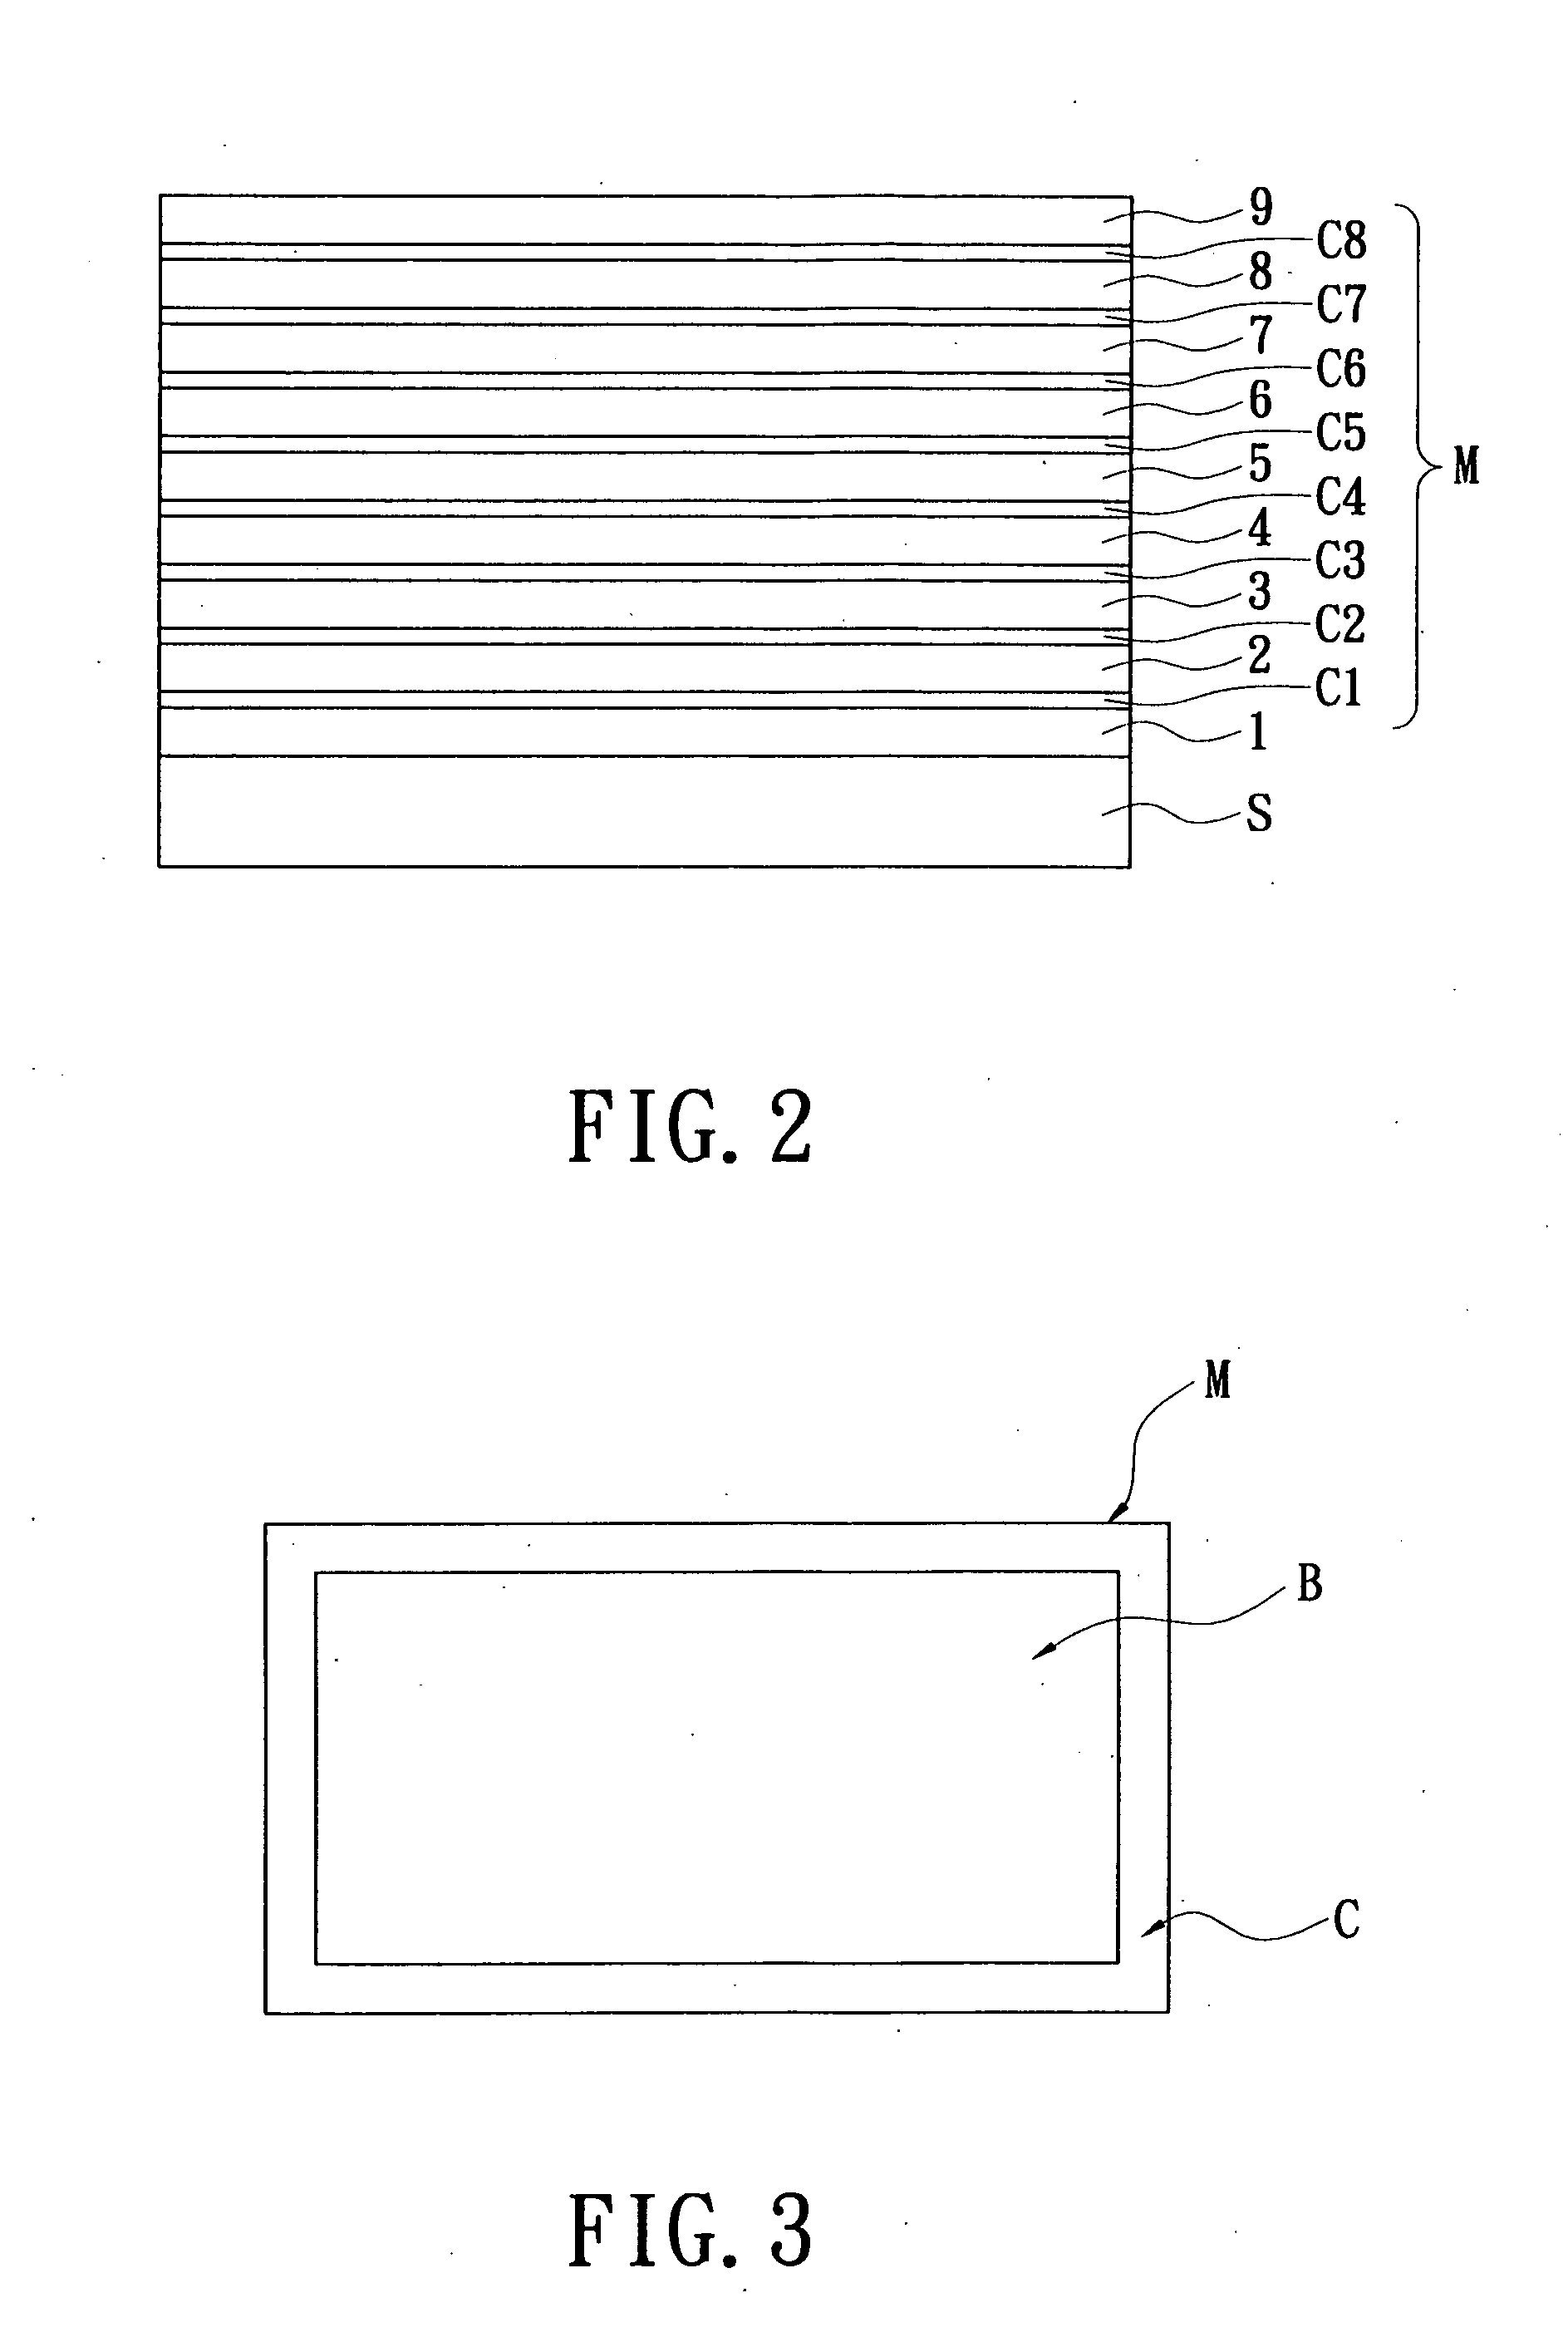 Extreme low resistivity light attenuation anti-reflection coating structure in order to increase transmittance of blue light and method for maufacturing the same